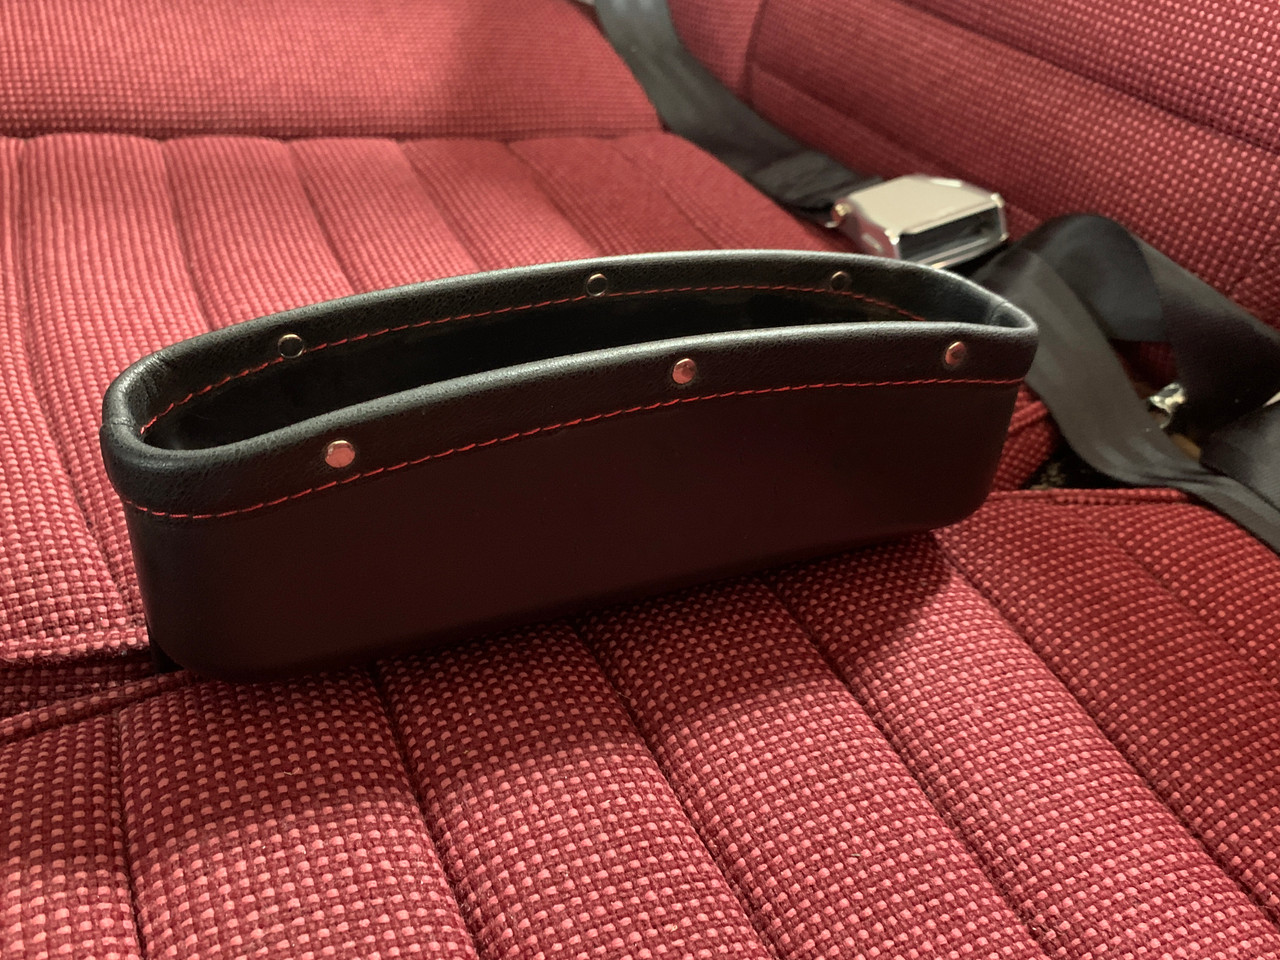 Aircraft Seat Organizer for the Cockpit by Got Your Six Aviation